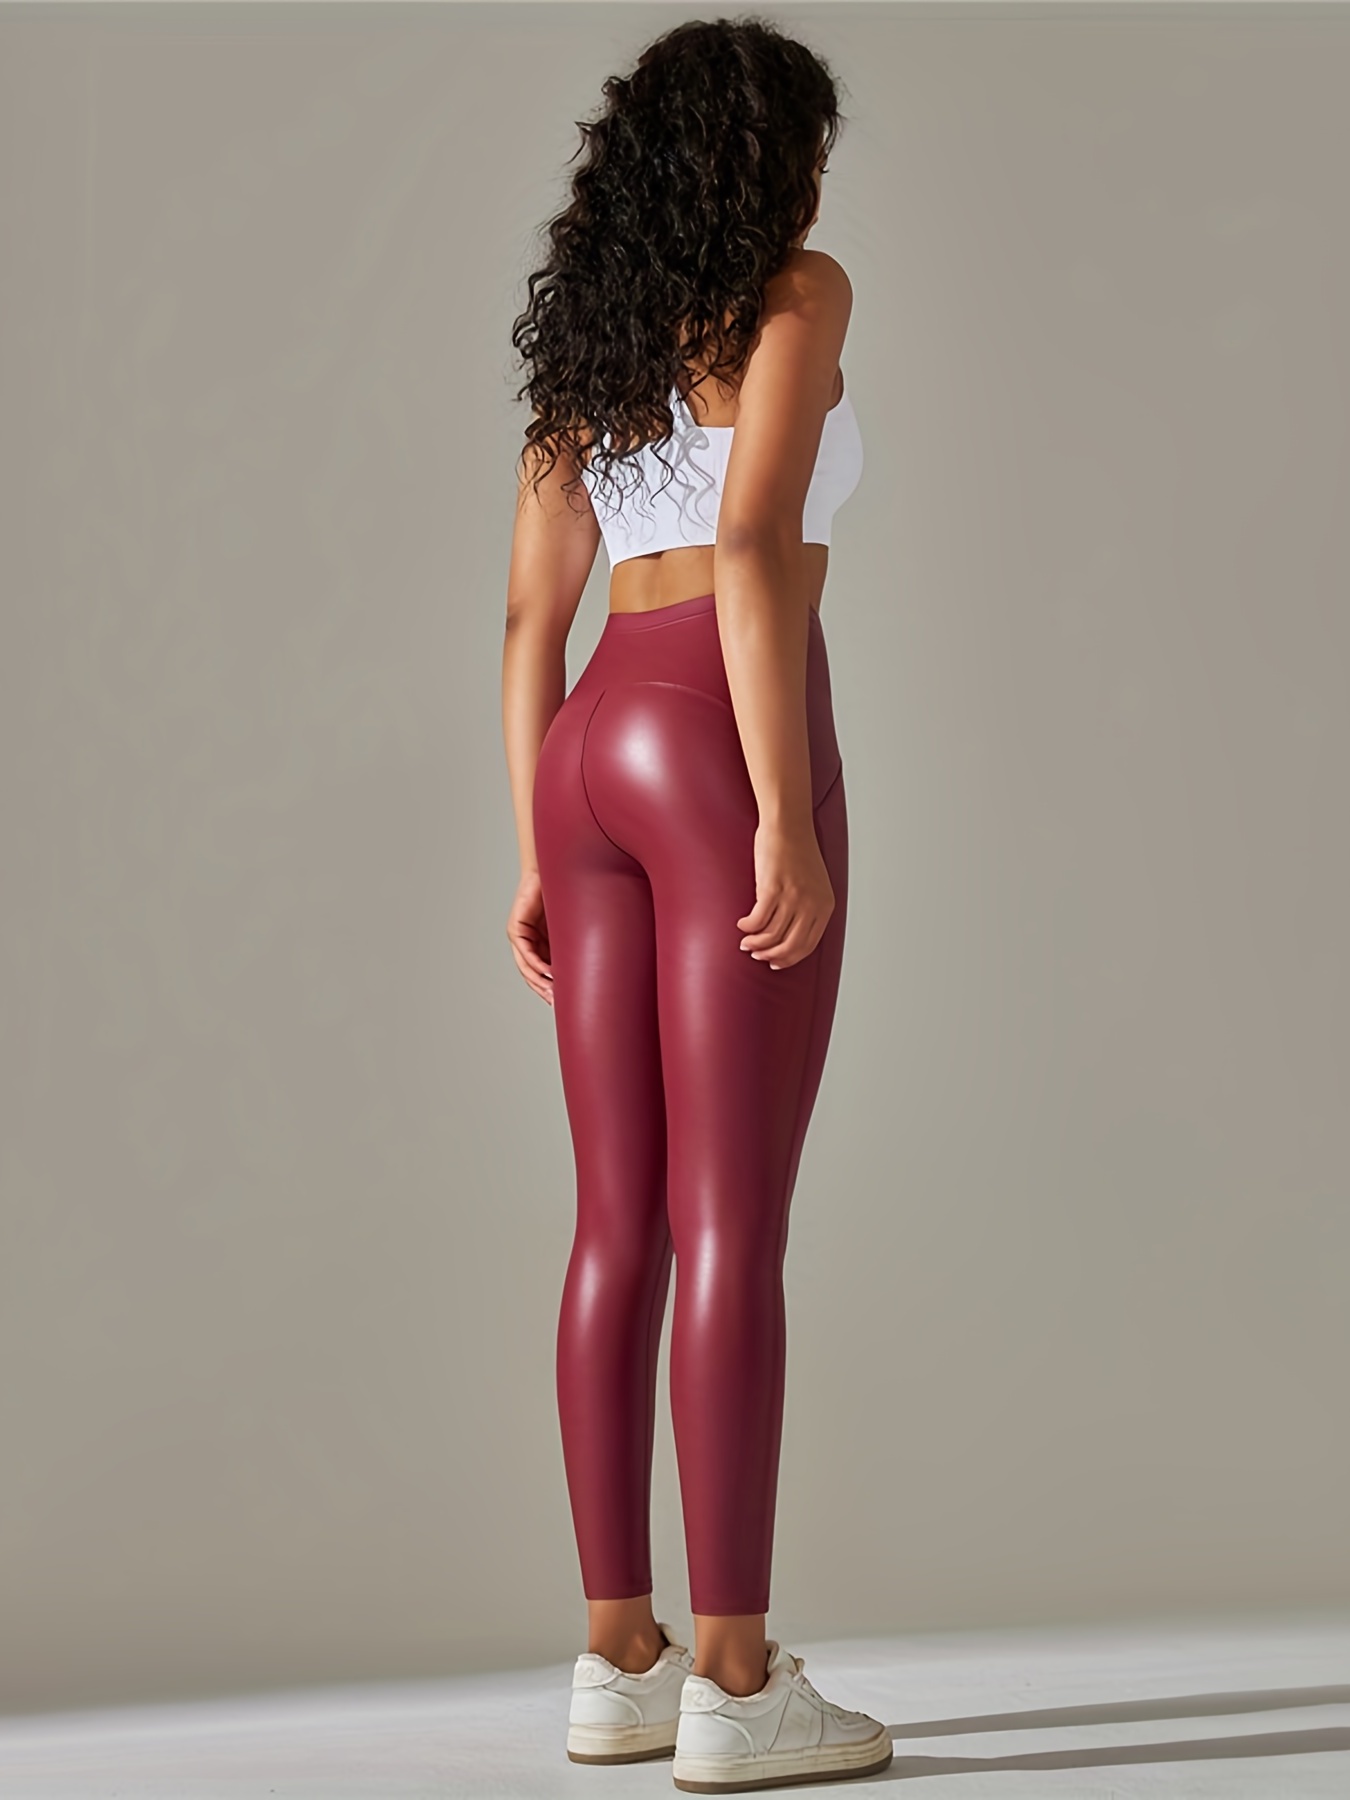 Shiny leggings  outfit, Red leather pants, Leather pants women